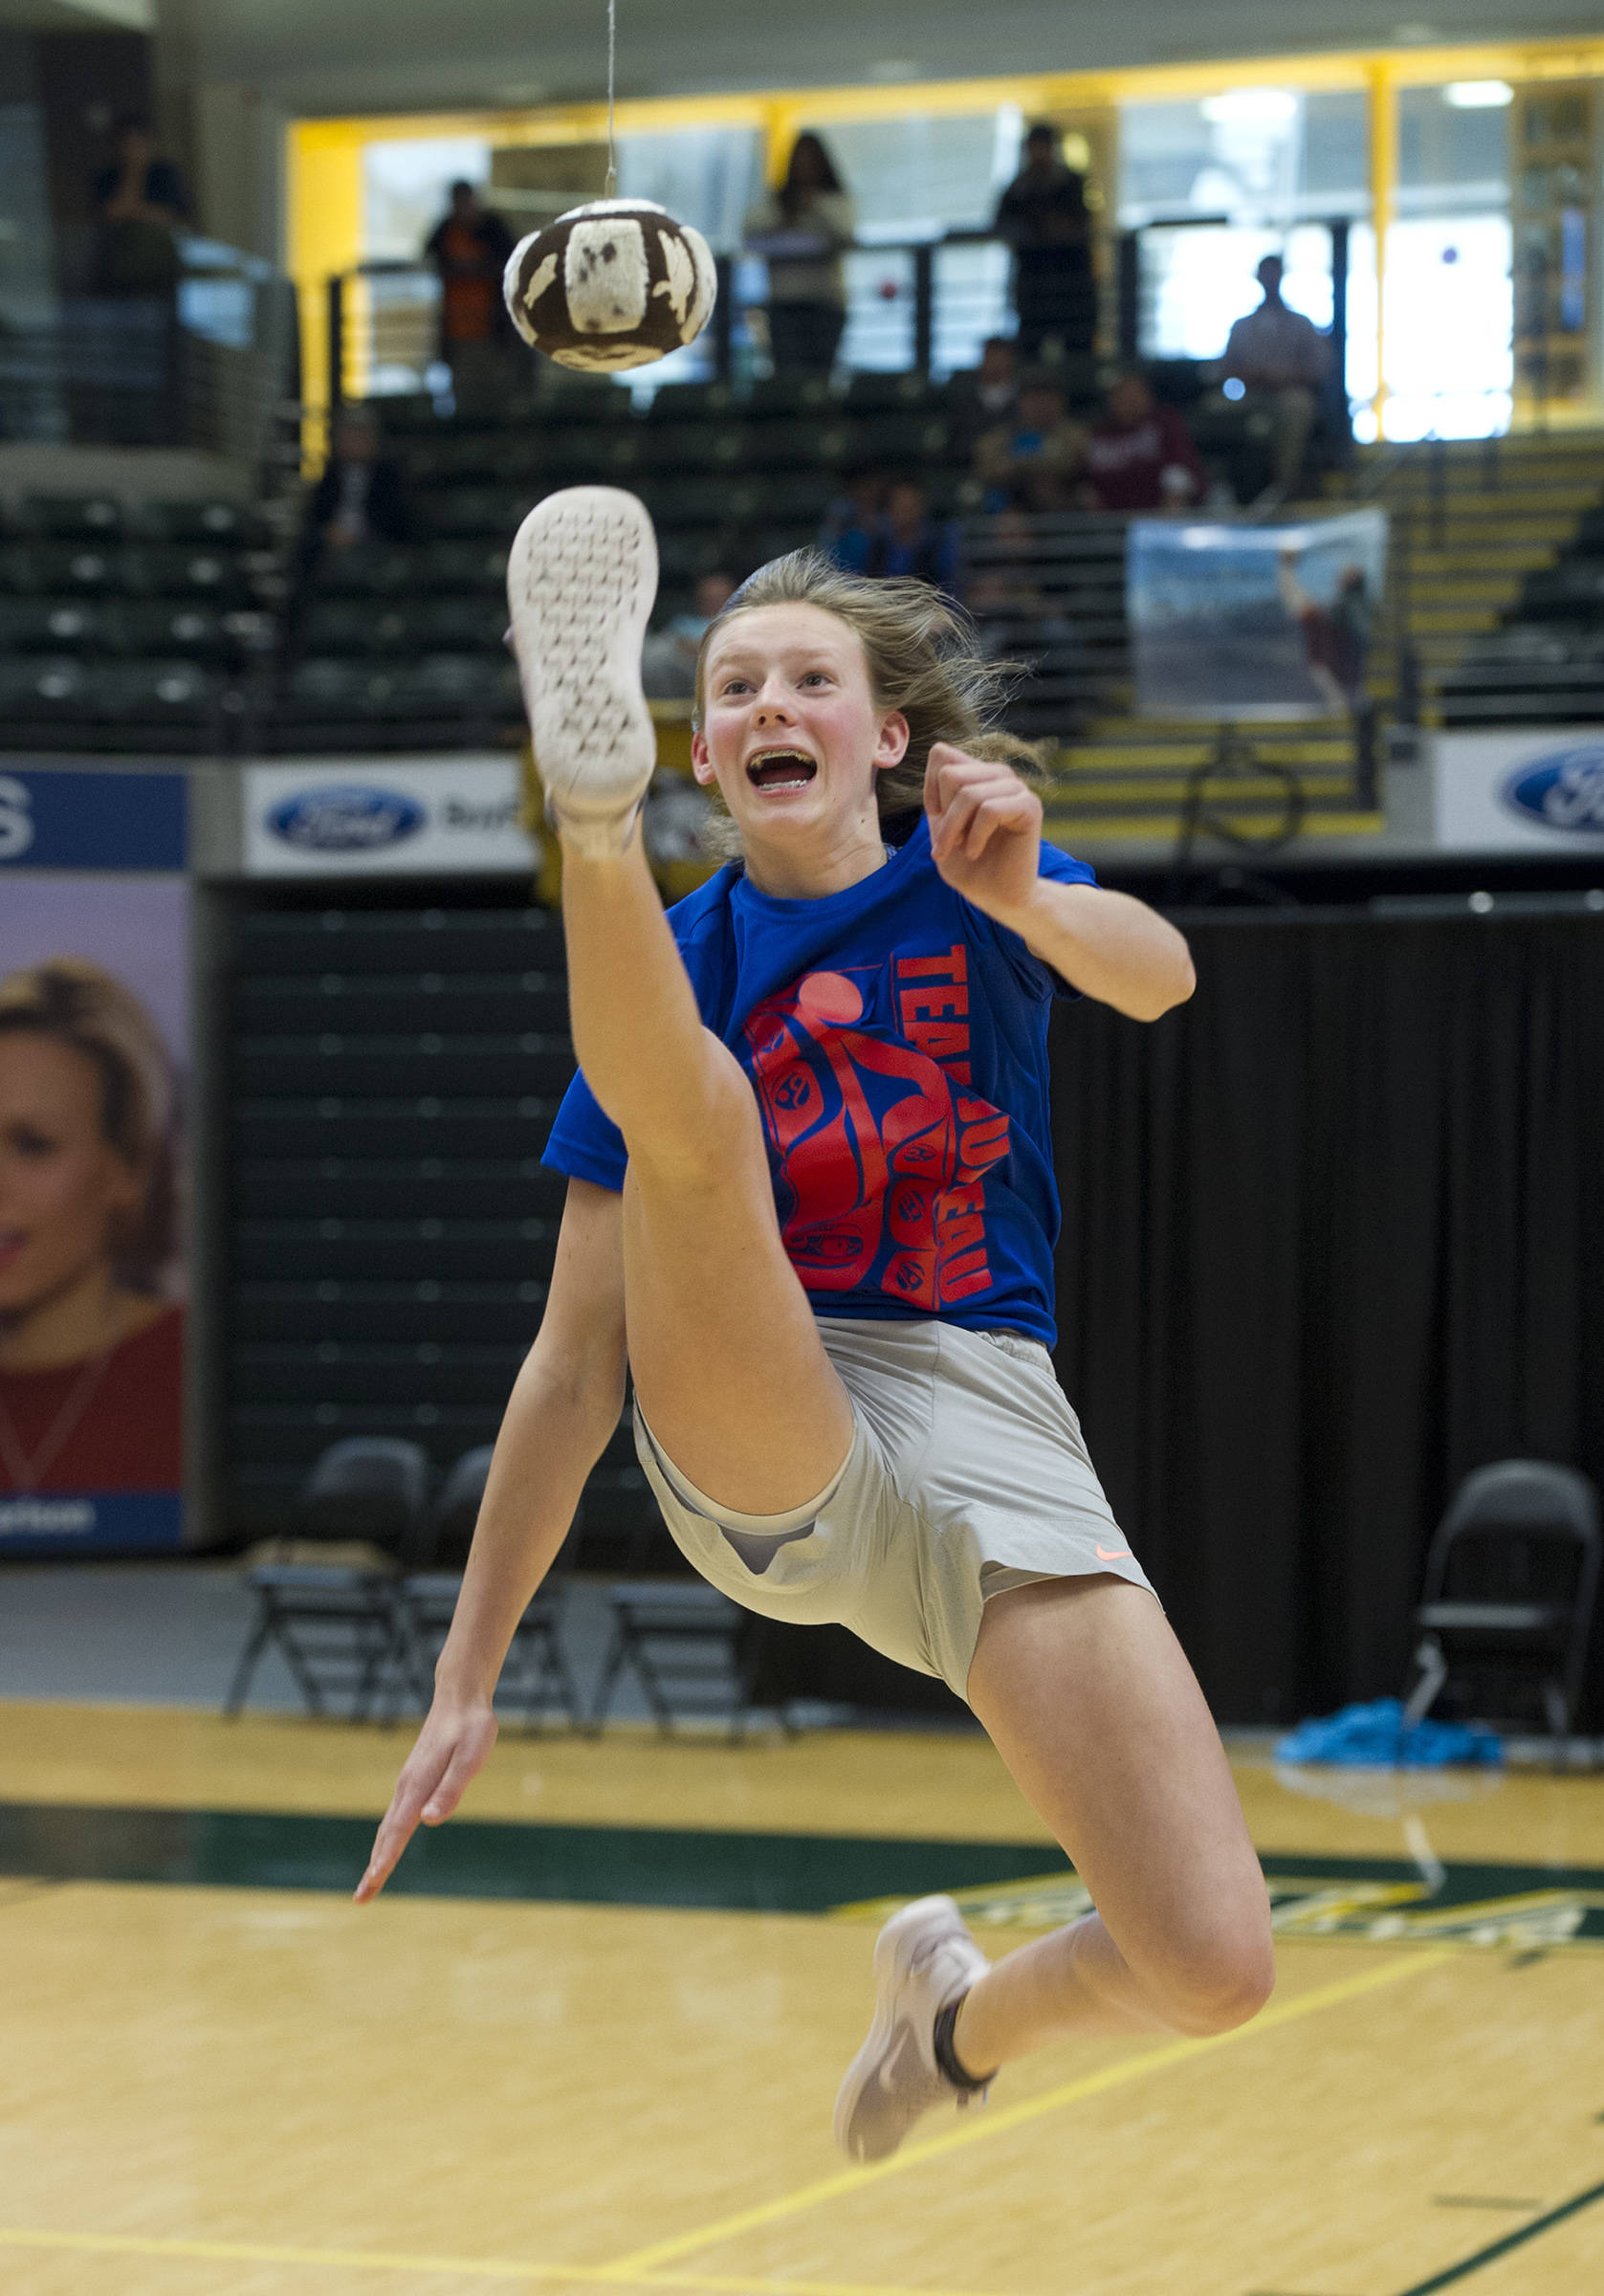 Skylar Tuckwood competes in the One-Foot High Kick at the 2019 NYO Games at the Alaska Airlines Center in Anchorage on Saturday, April 27, 2019. (Michael Dinneen | For the Empire)